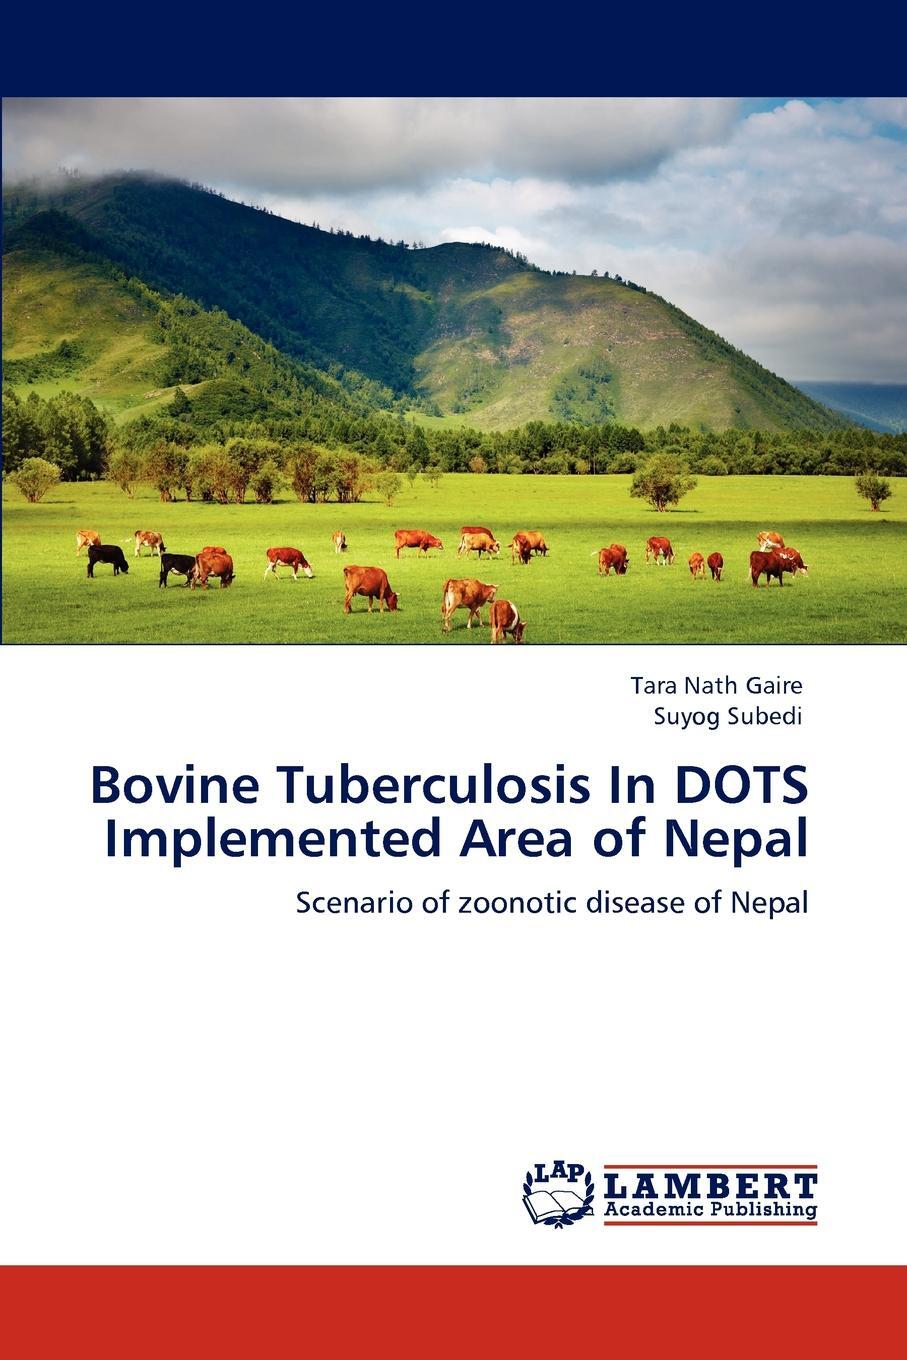 фото Bovine Tuberculosis In DOTS Implemented Area of Nepal